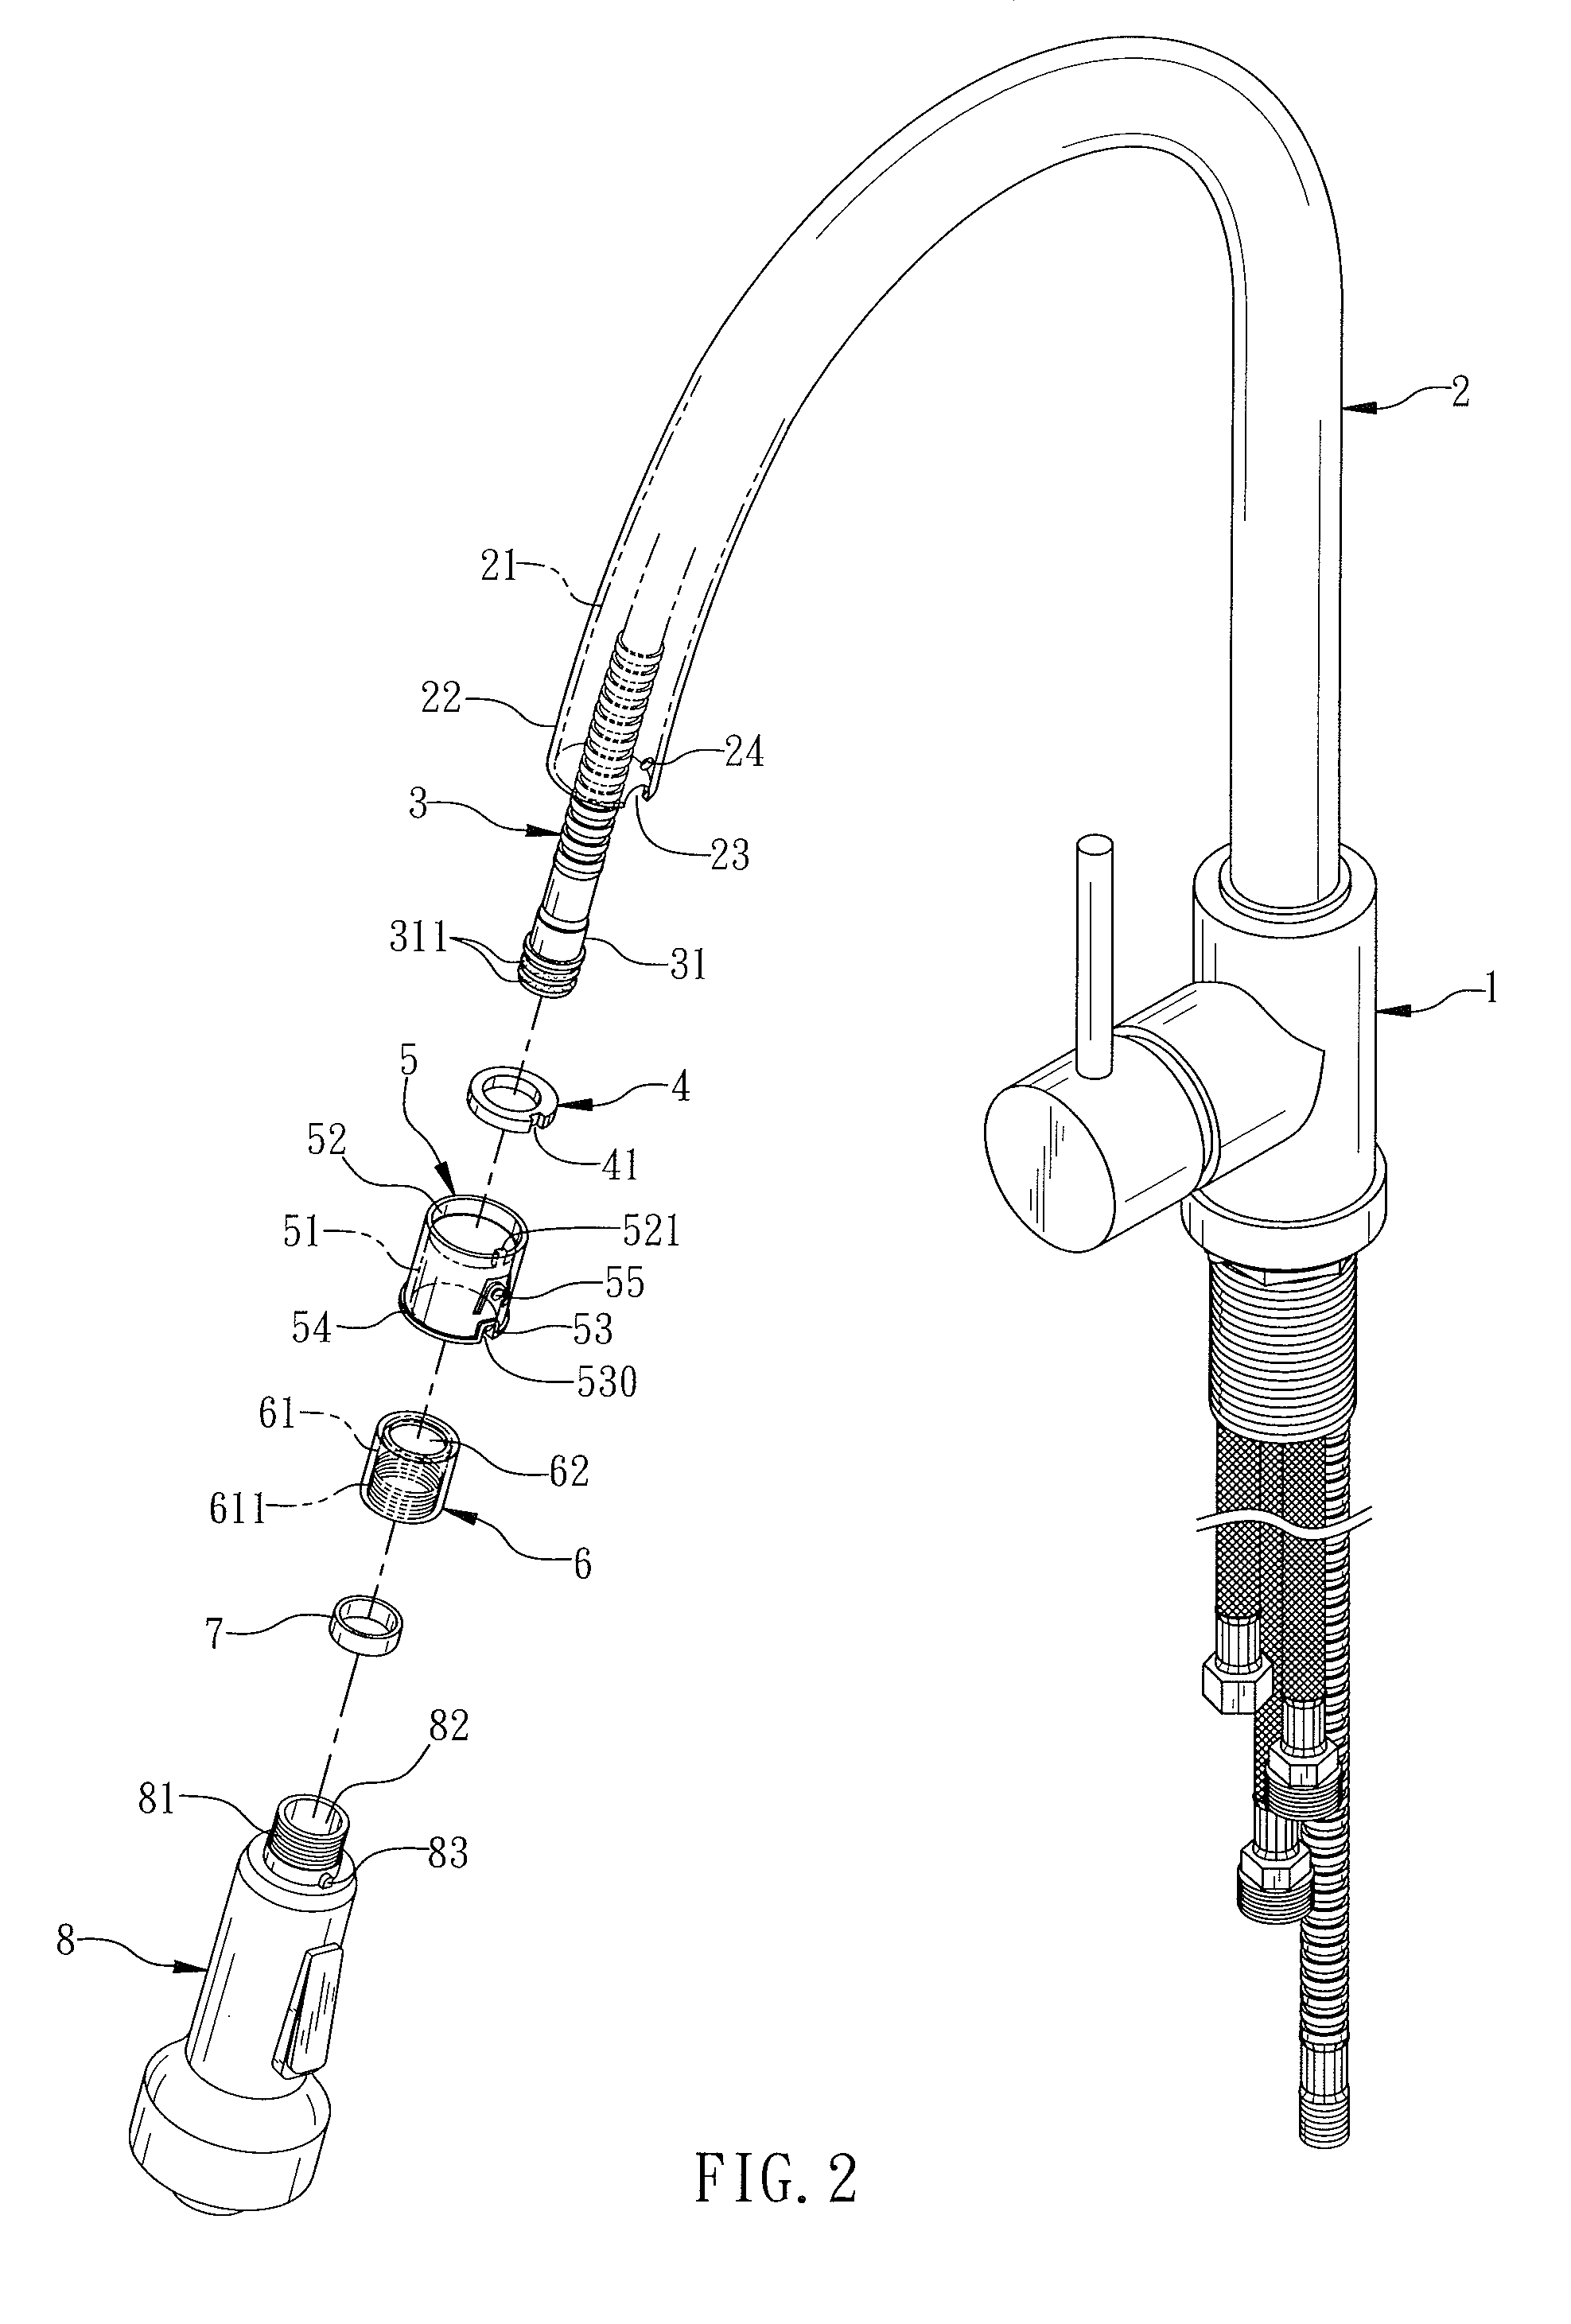 Faucet with retractable spout that can be positioned quickly and automatically